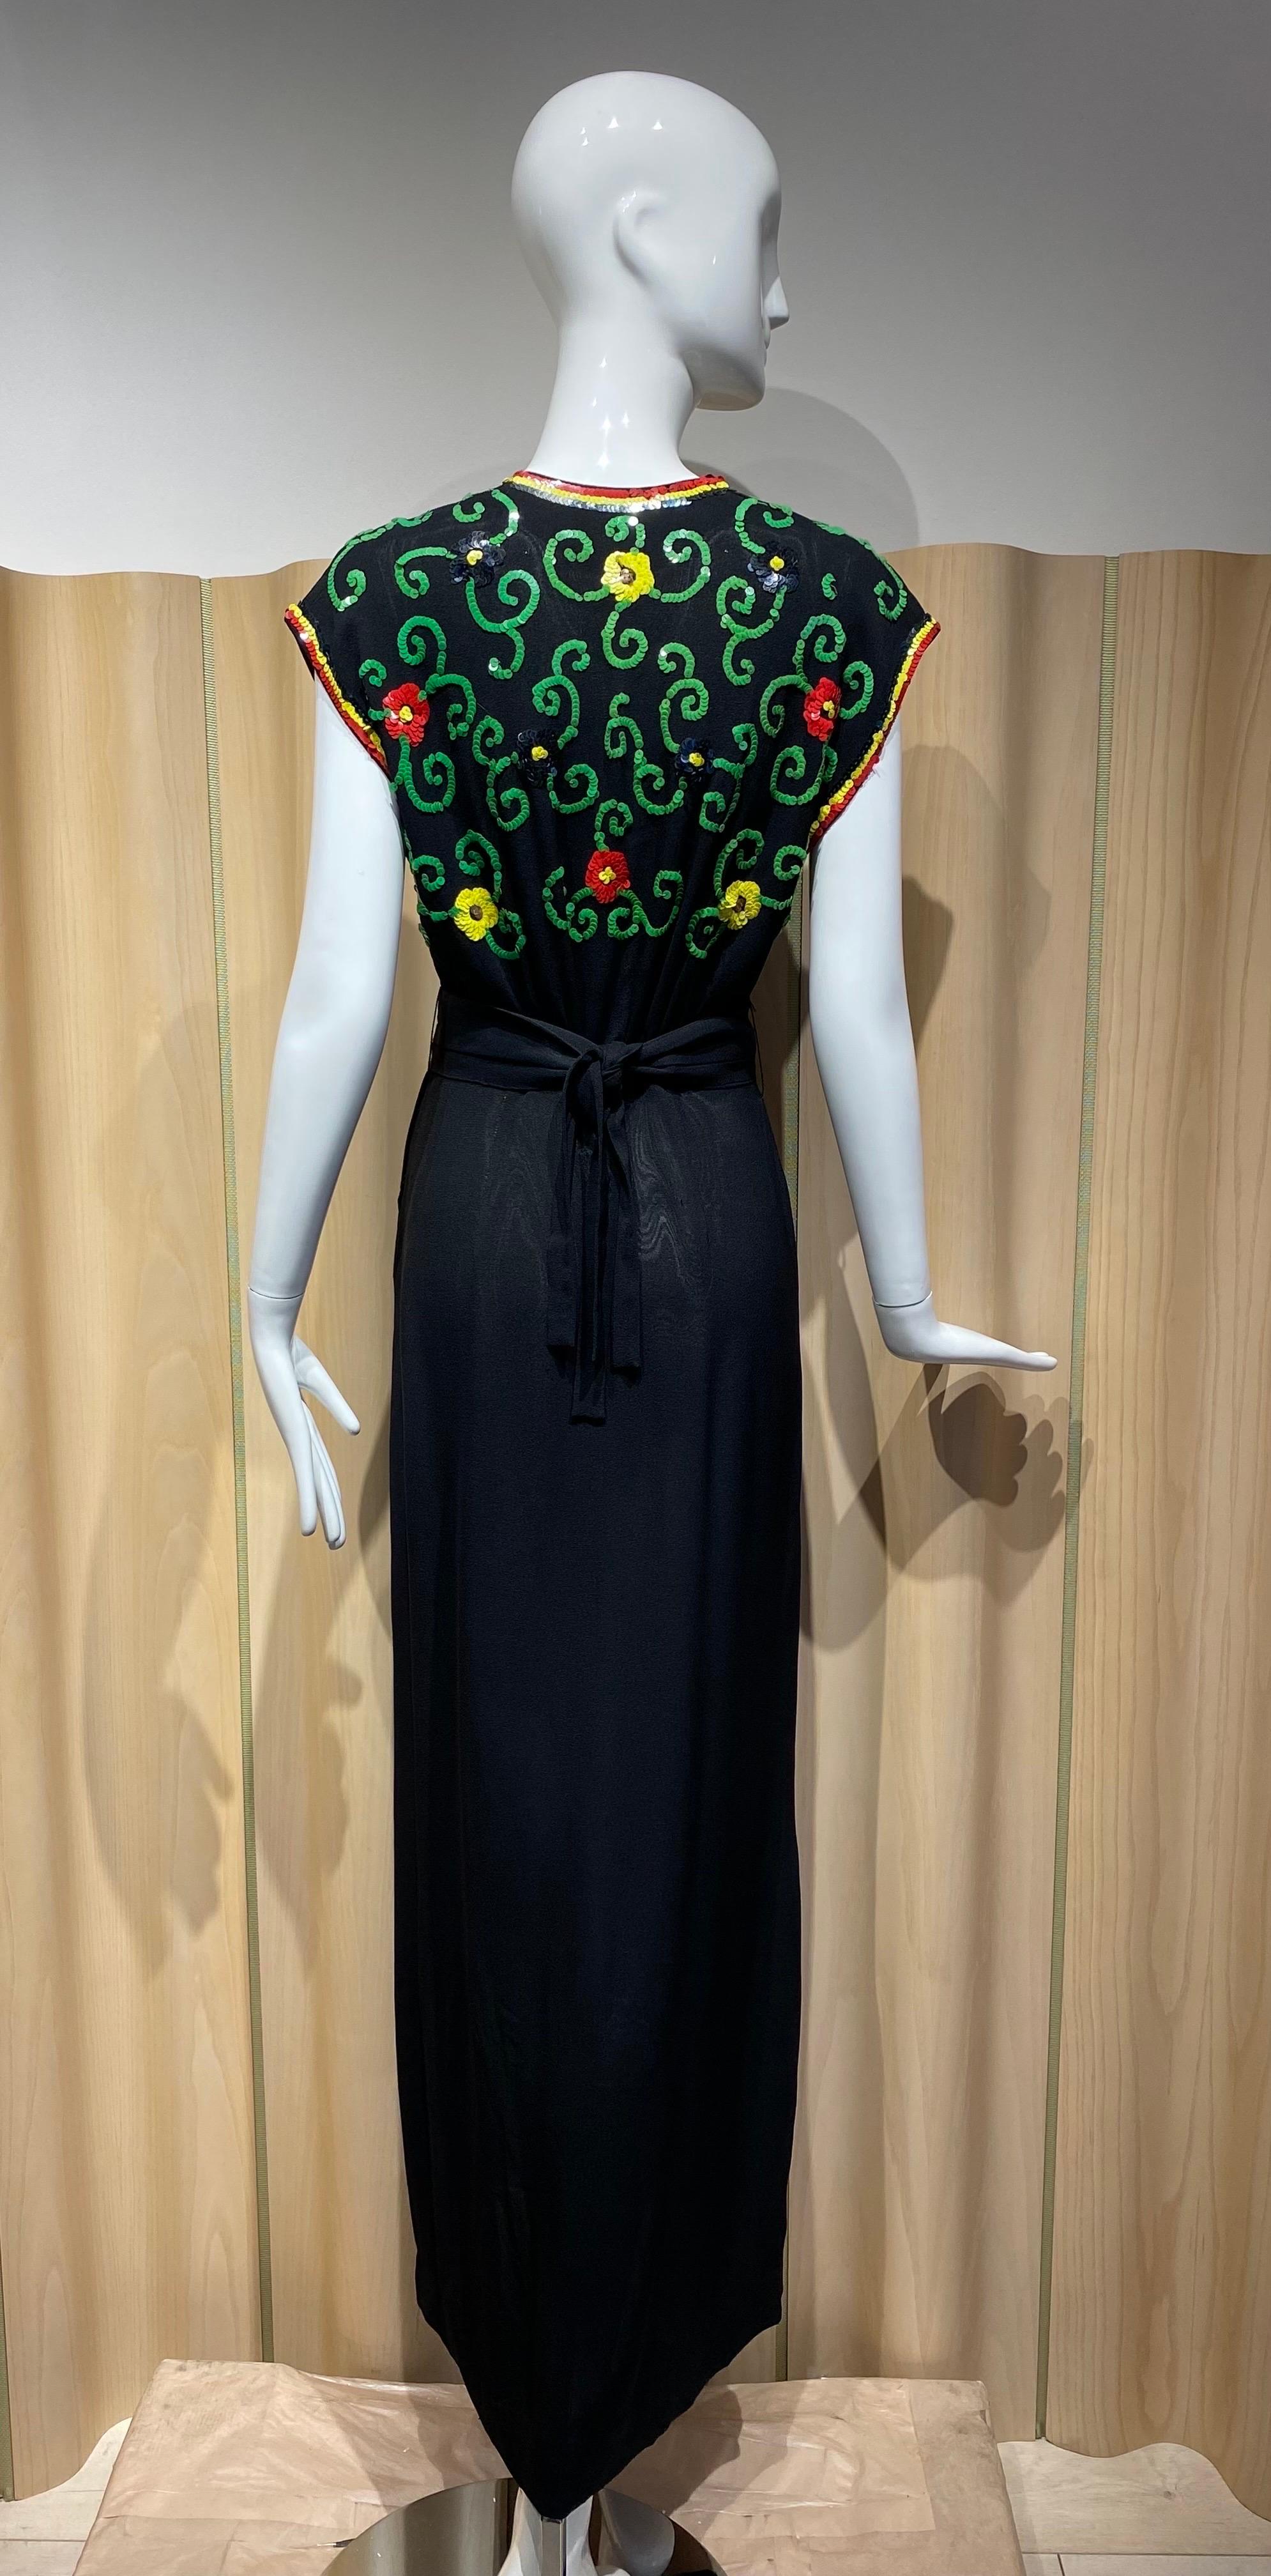 1940s Black Crepe Dress with Green and Yellow Paisley beaded sequins.
Dress comes with sash/belt.
Size M